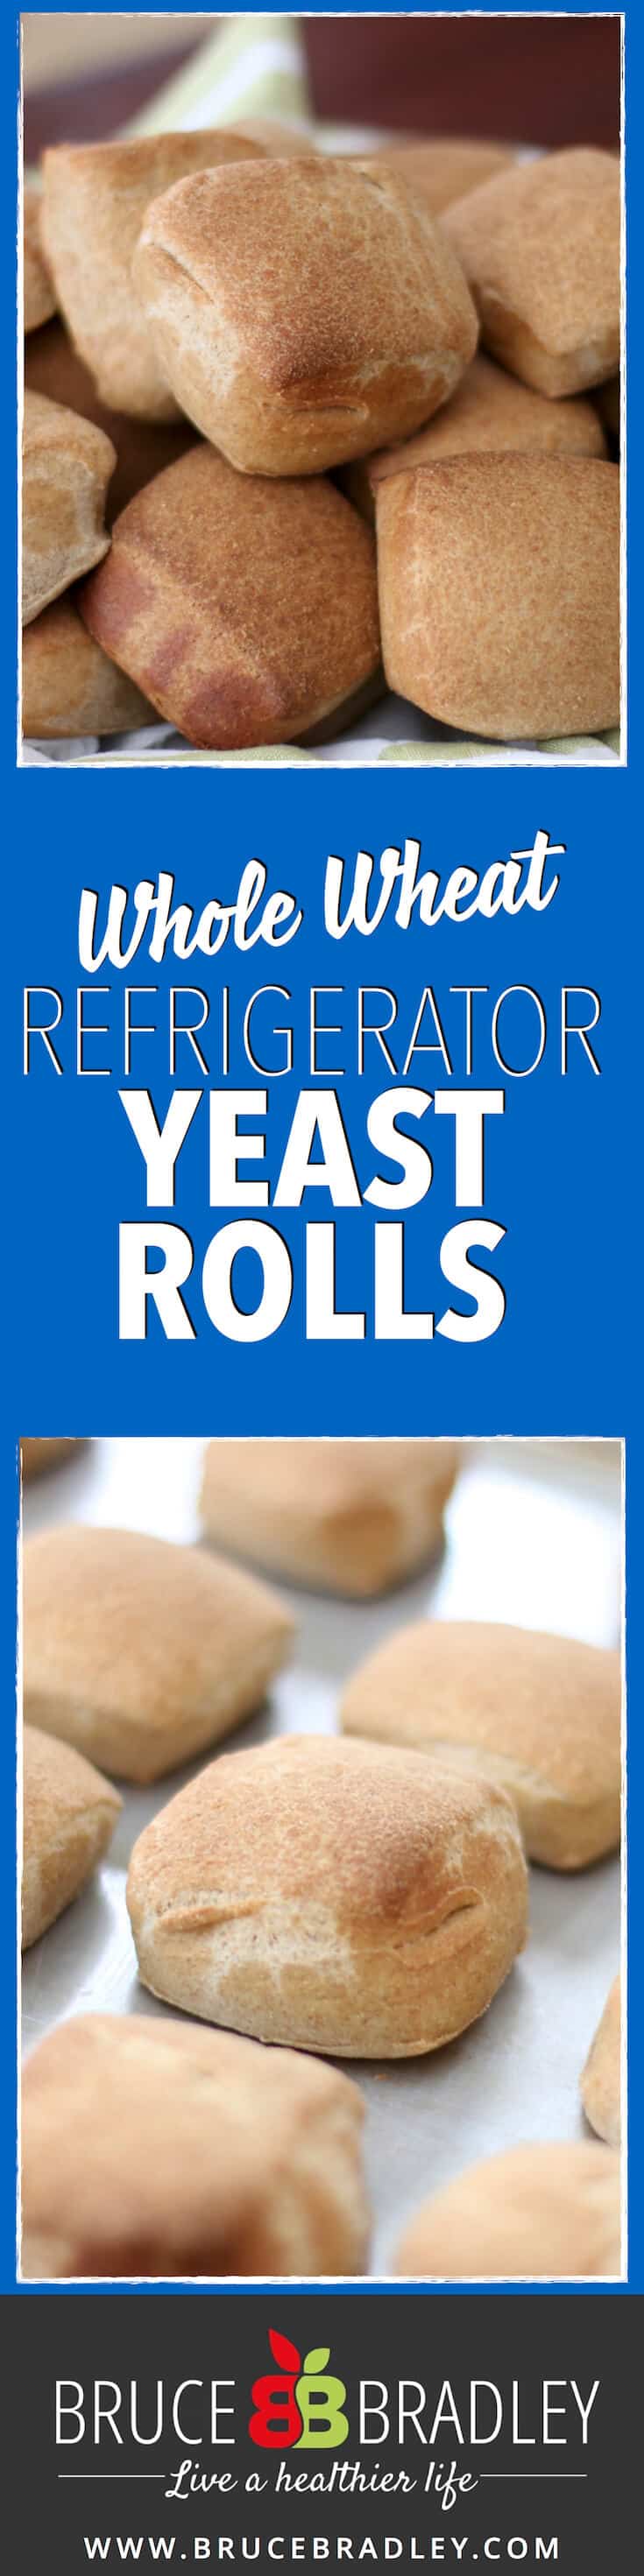 Skip The Fake, Store-Bought Refrigerated Rolls And Switch To A Homemade, Make-Ahead, Whole Wheat Yeast Roll That Will Wow Your Entire Family!